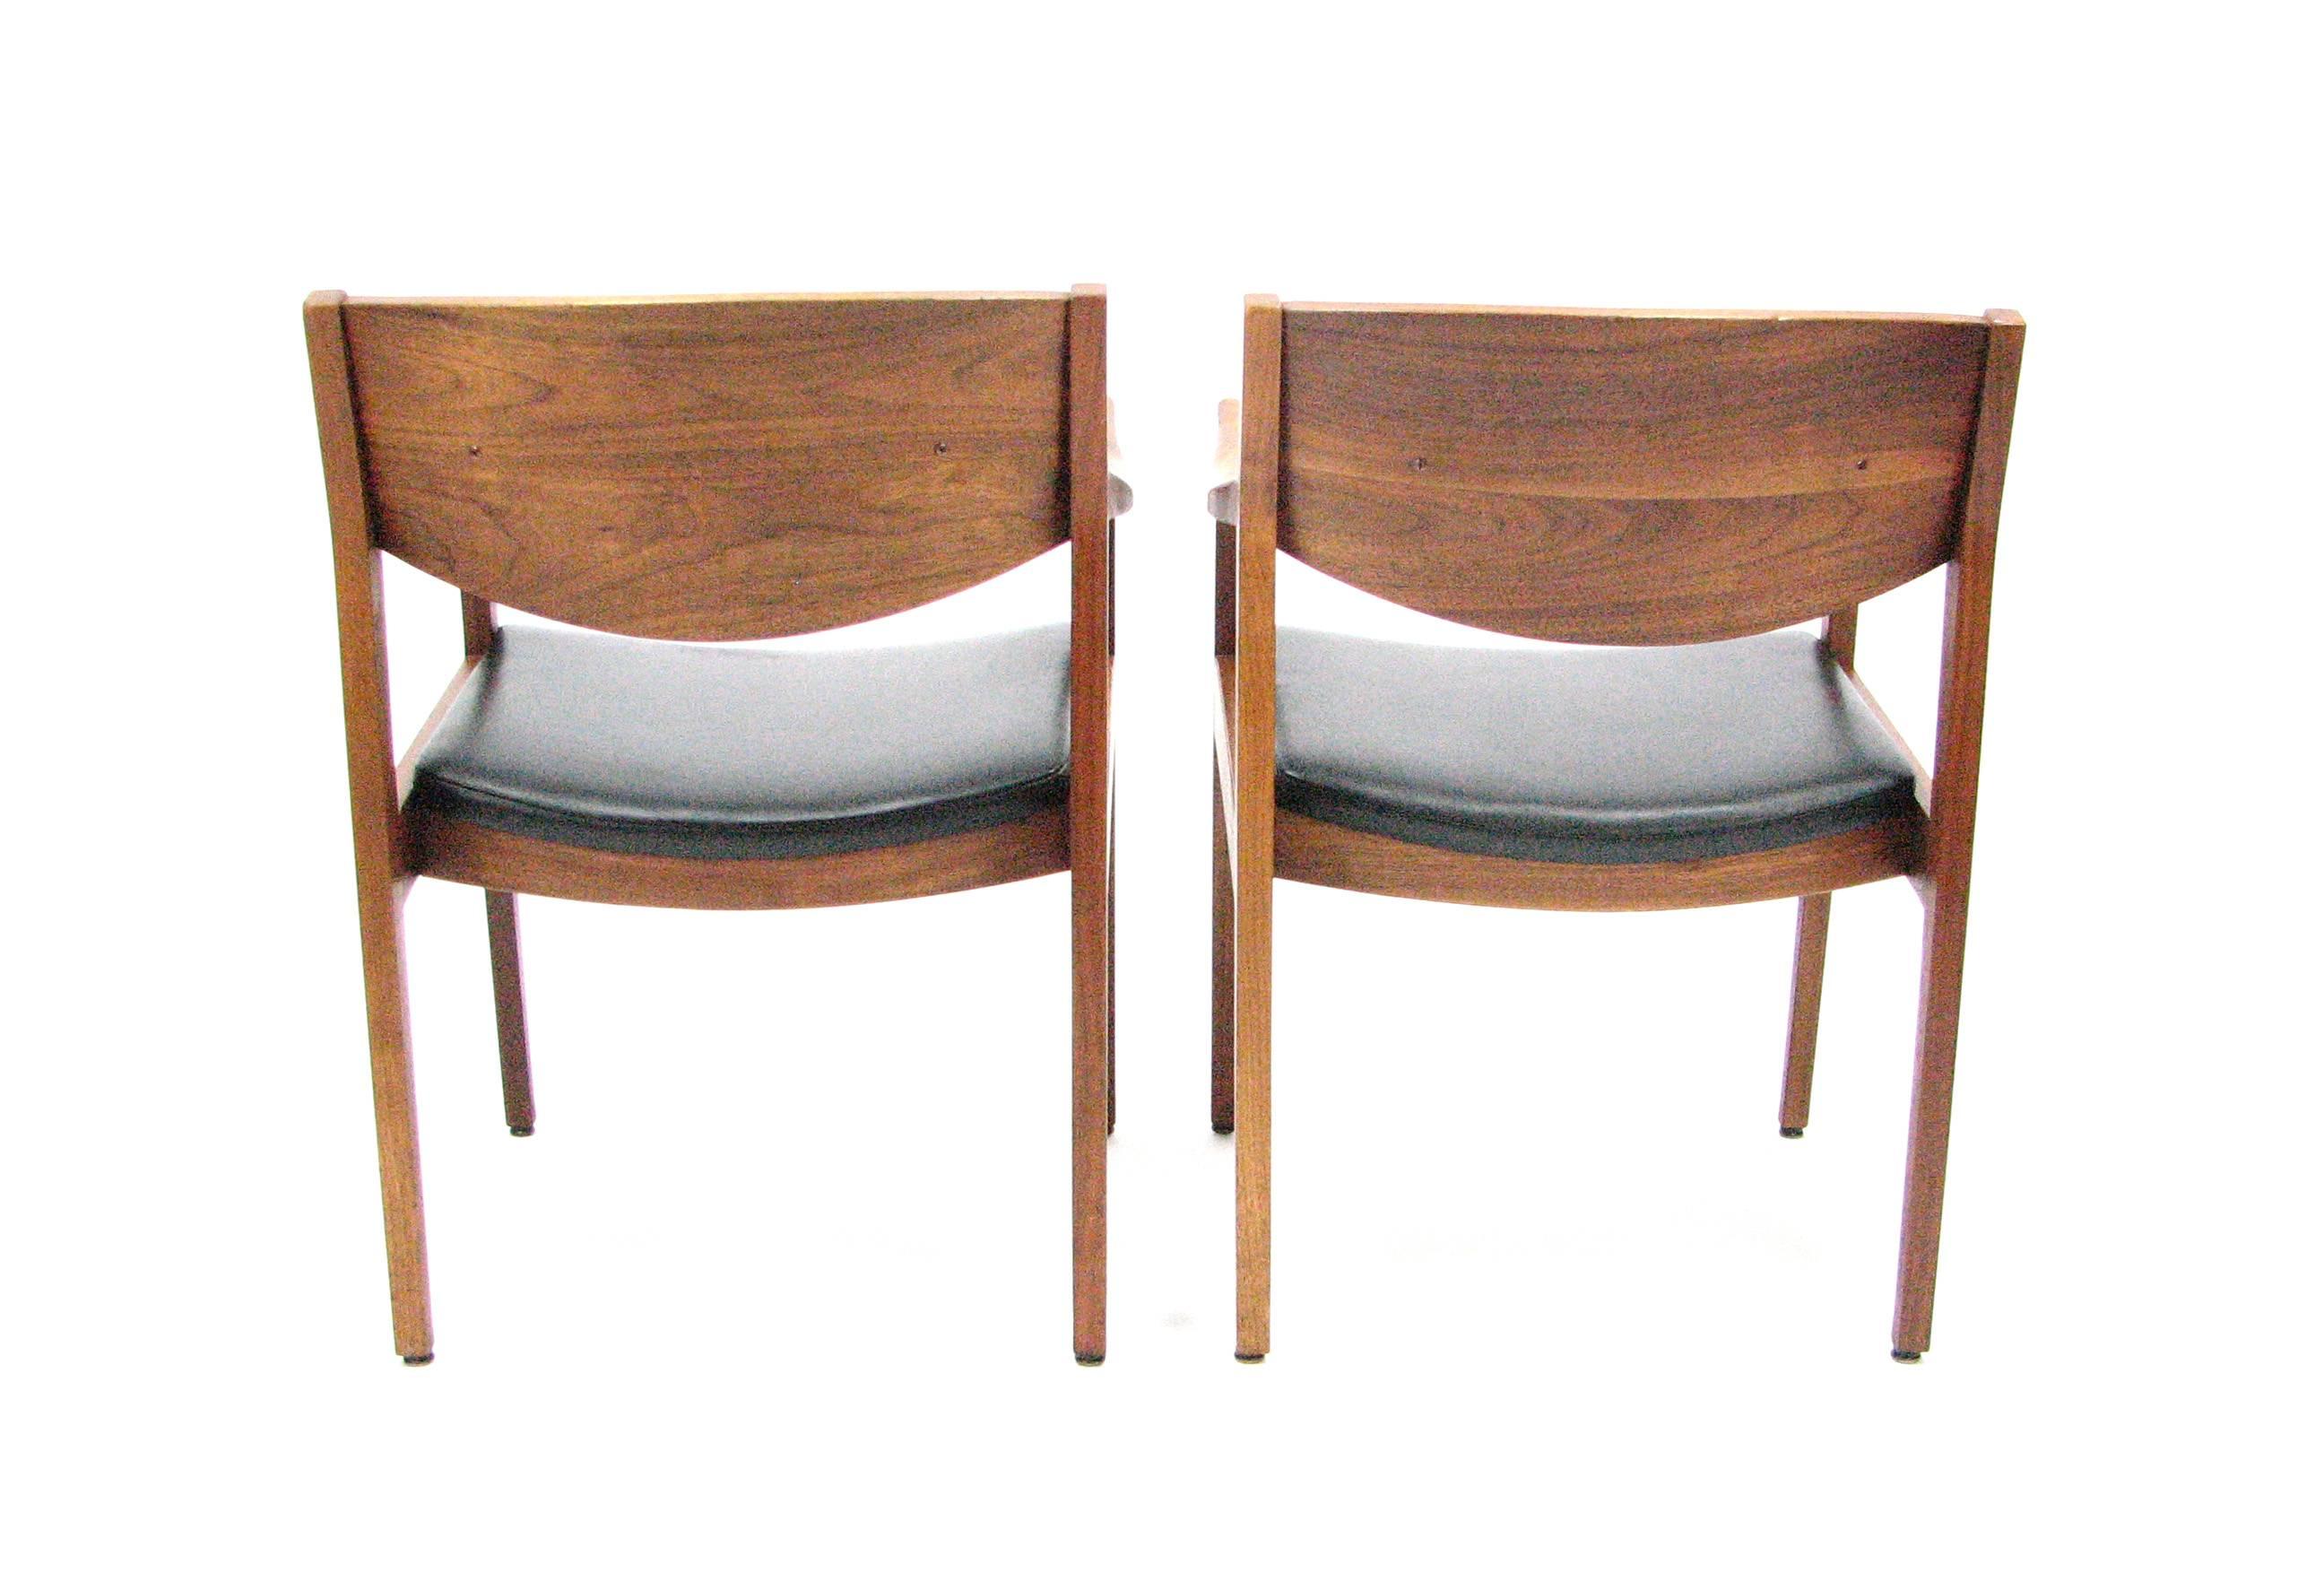 This pair of remarkably comfortable Mid-Century chairs in the manner of Jens Risom was produced by Gunlocke in the 1950s.  Beautifully grained walnut with Naugahyde upholstery.